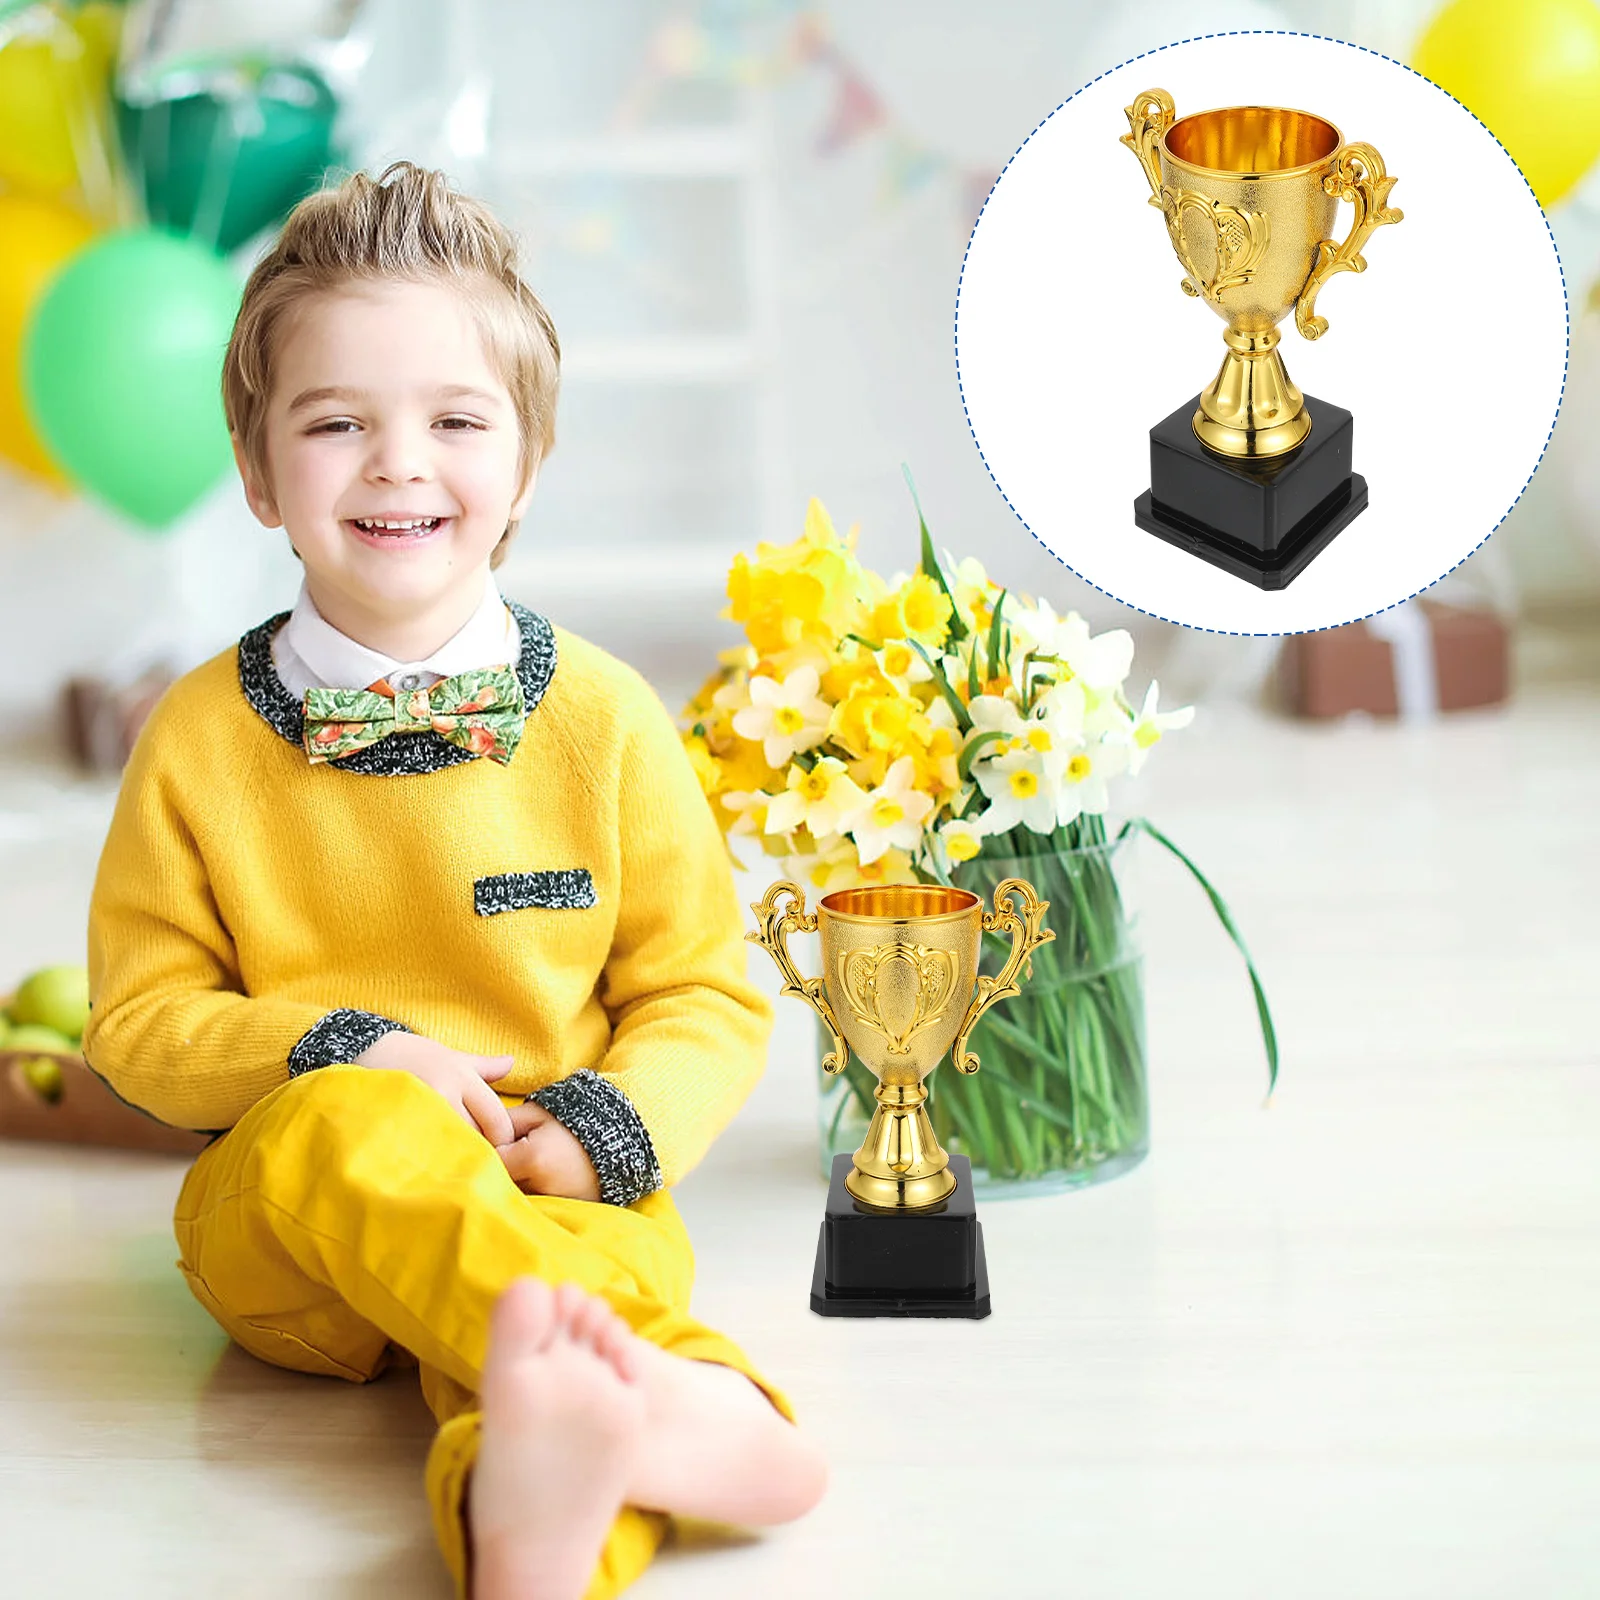 

Trophy Award Trophiescup Kidsgold Winner Trophys Awards Children School Cups Reward Gameparty Soccer Football Competitions